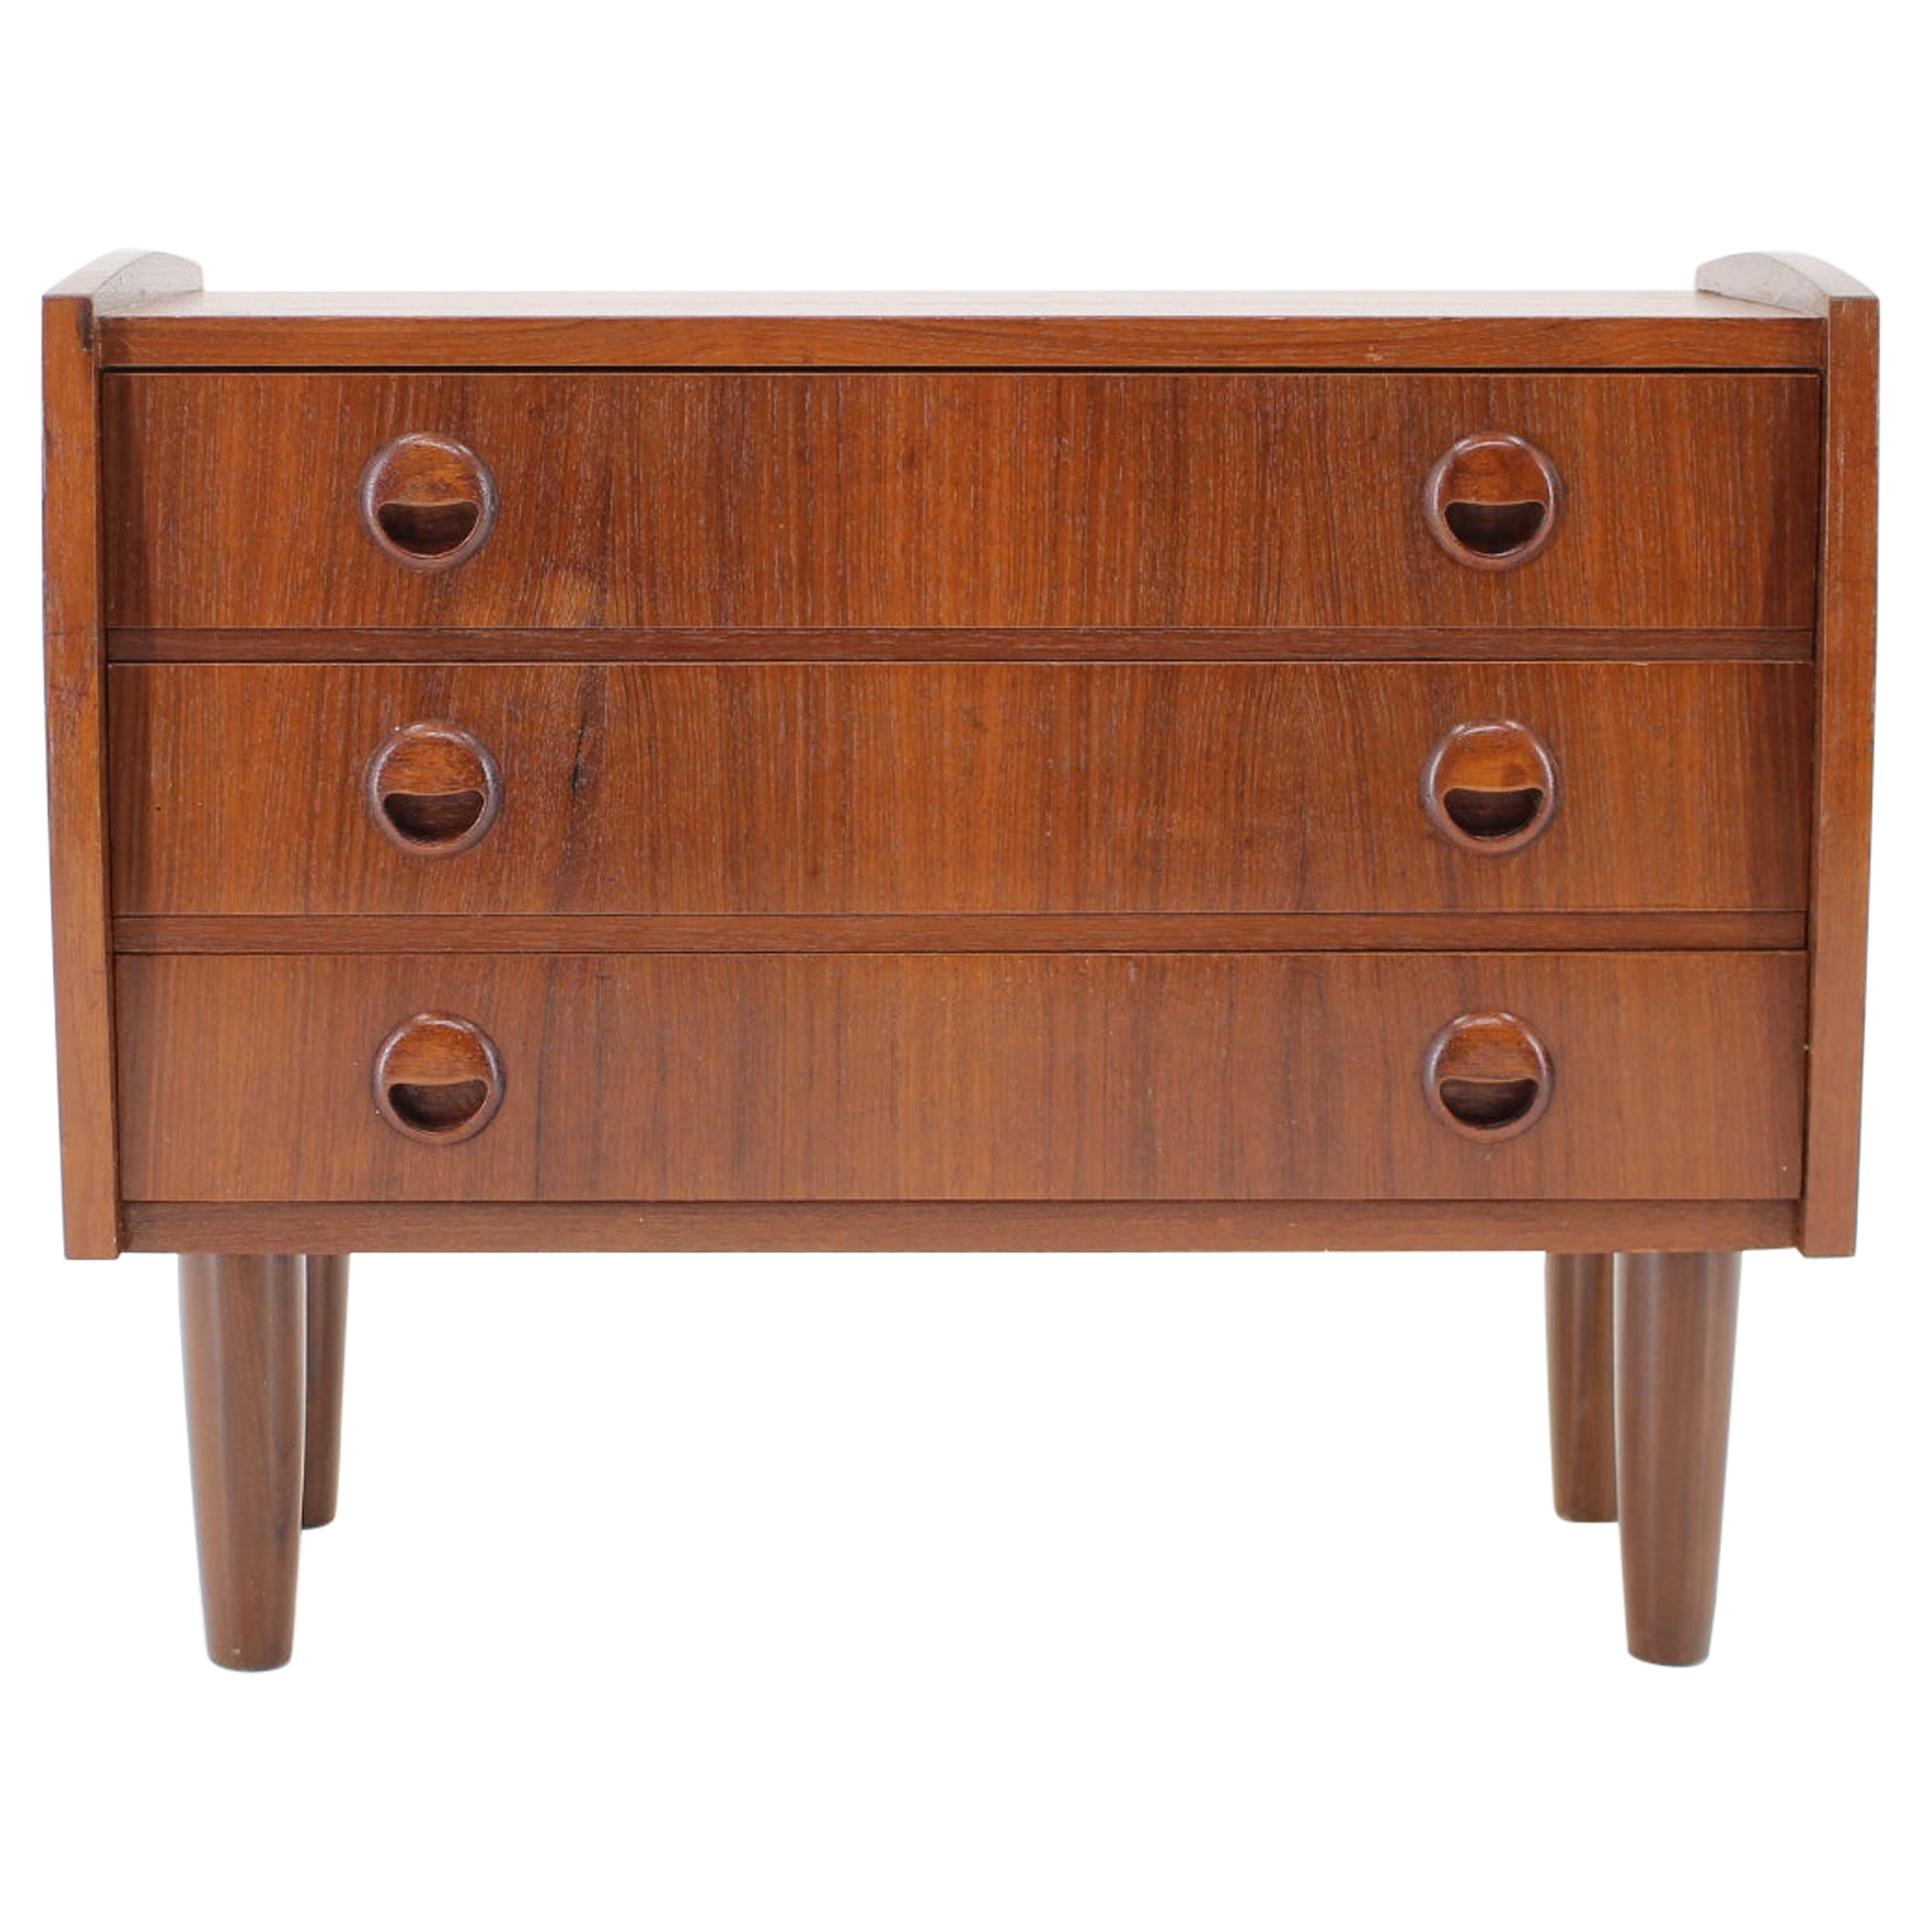 1960s Danish Teak Chest of Drawers For Sale